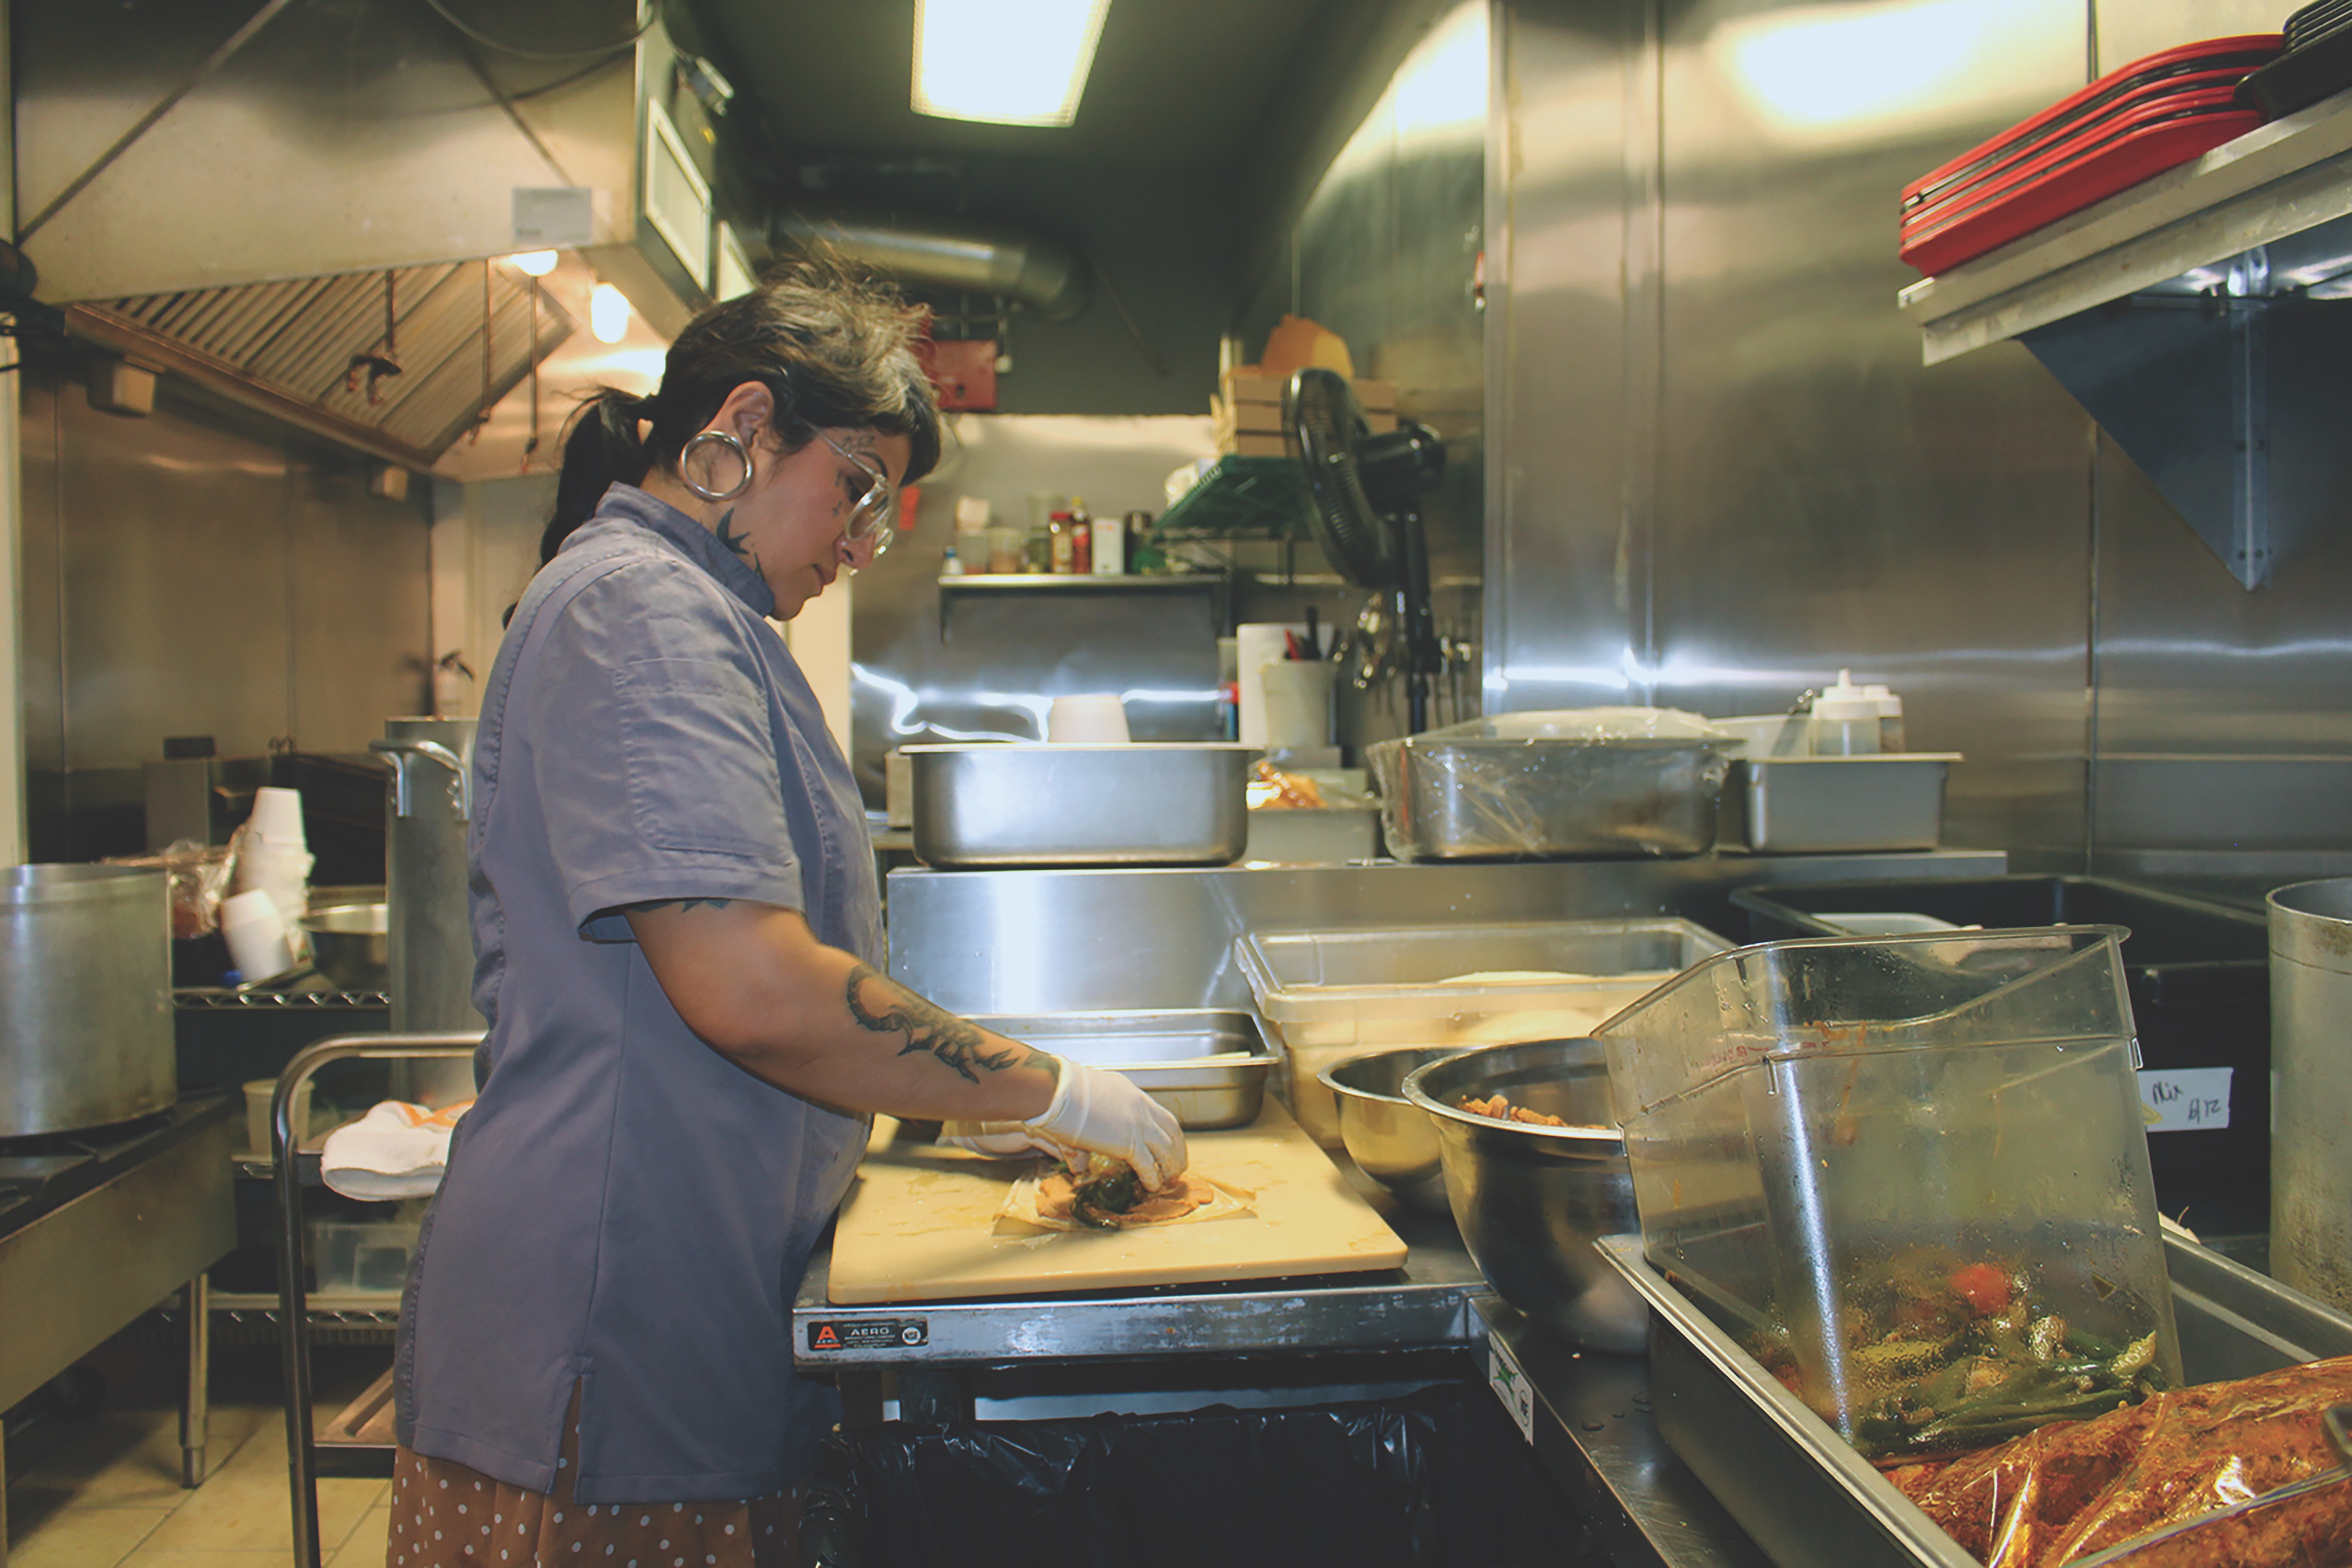 Tamales are one of the staple dishes at Juana Tamale. Photo: Jensen Toussaint/AL DÍA News.